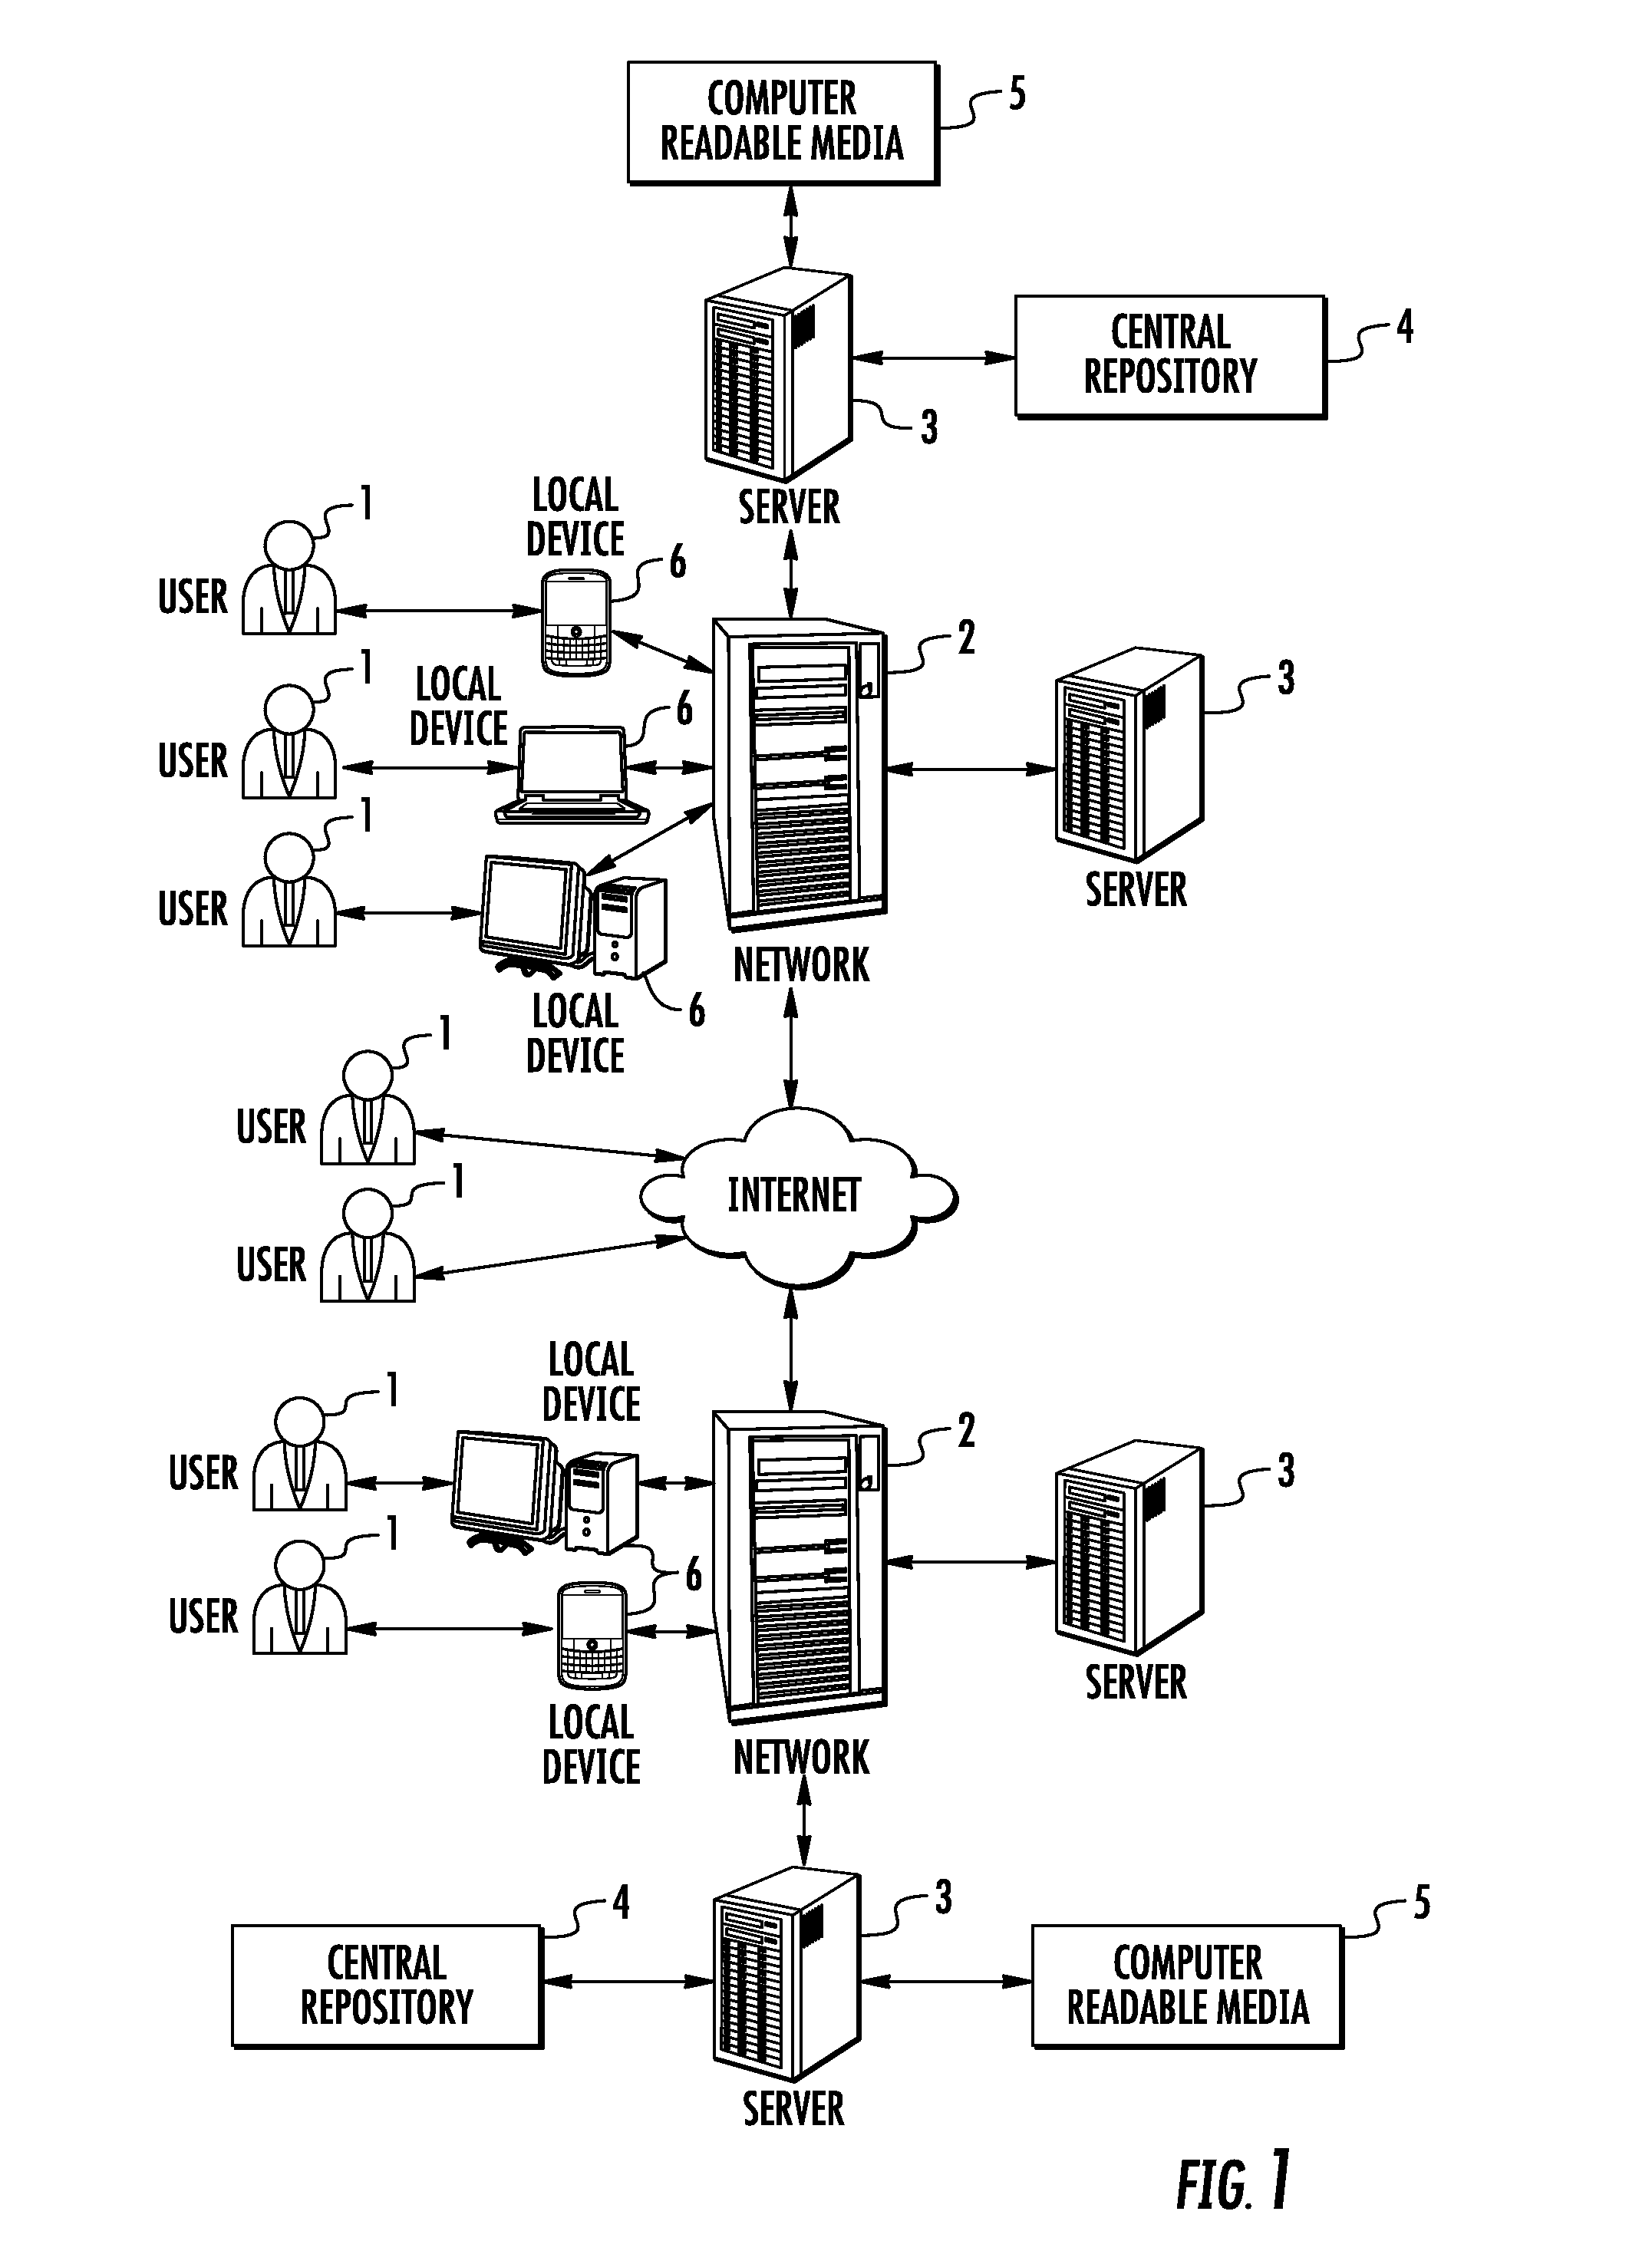 System and method for obtaining and transmitting brief patient notes